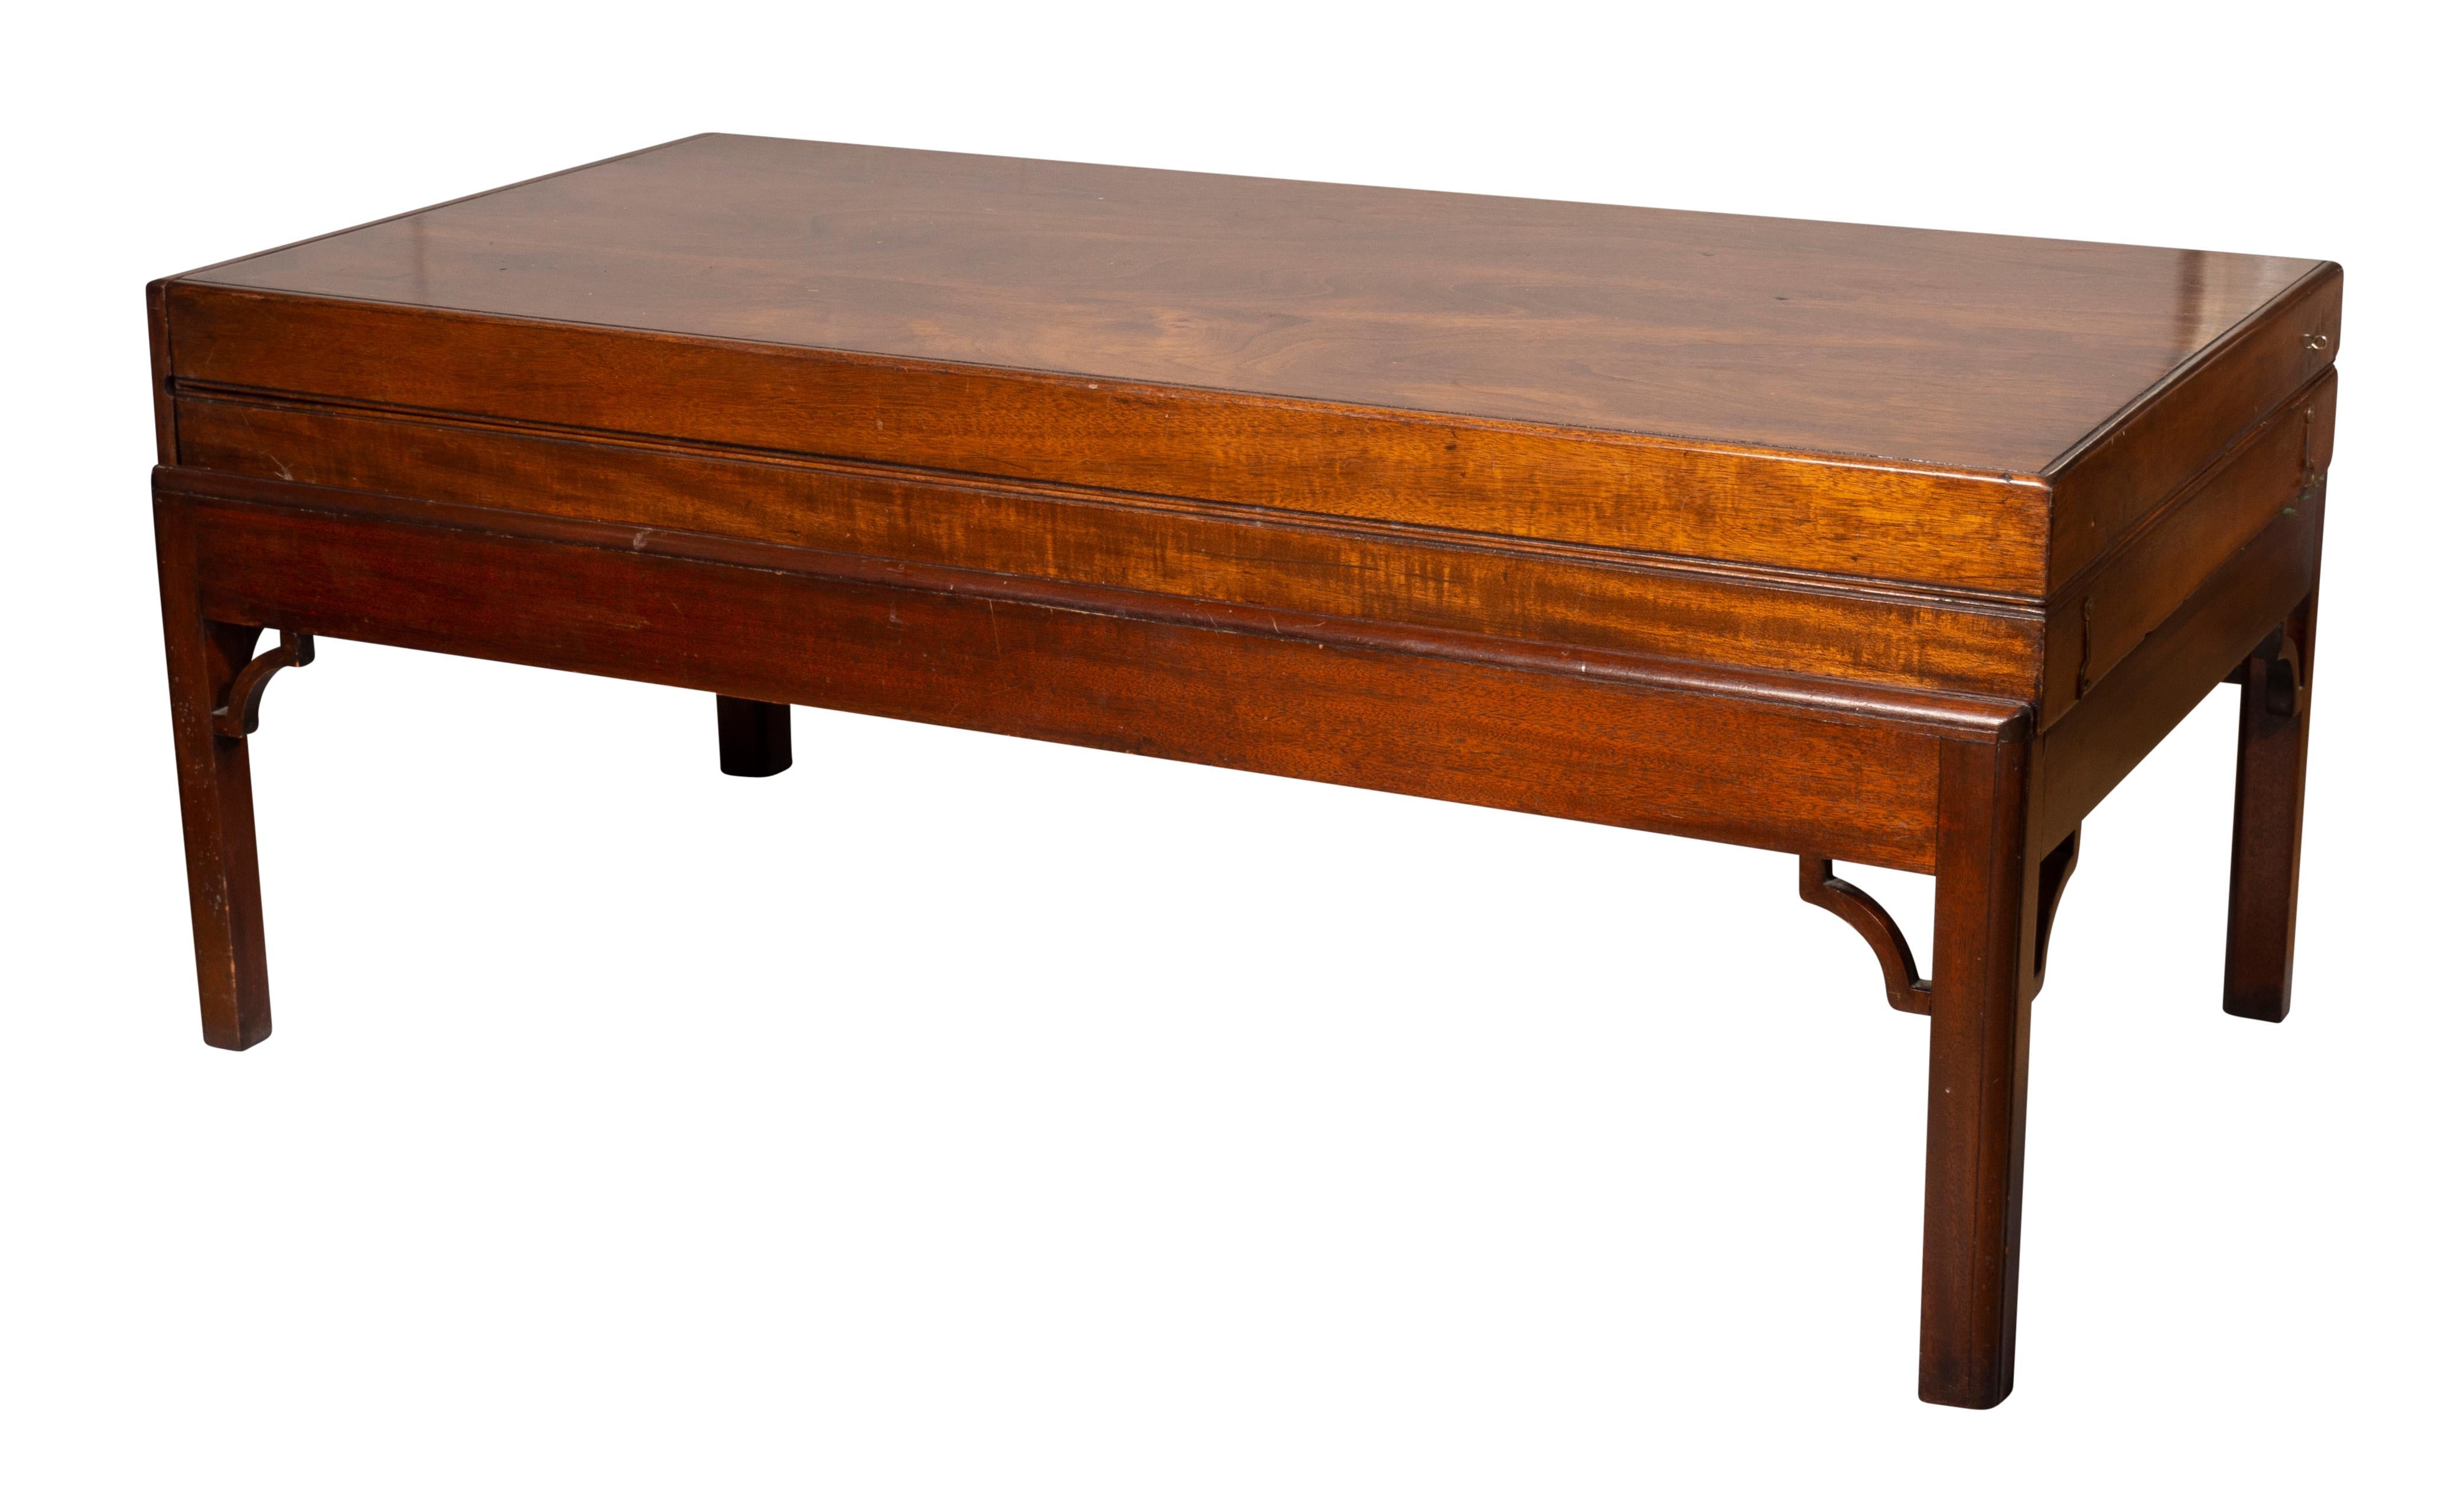 Baize Victorian Mahogany Bagatelle Table For Sale